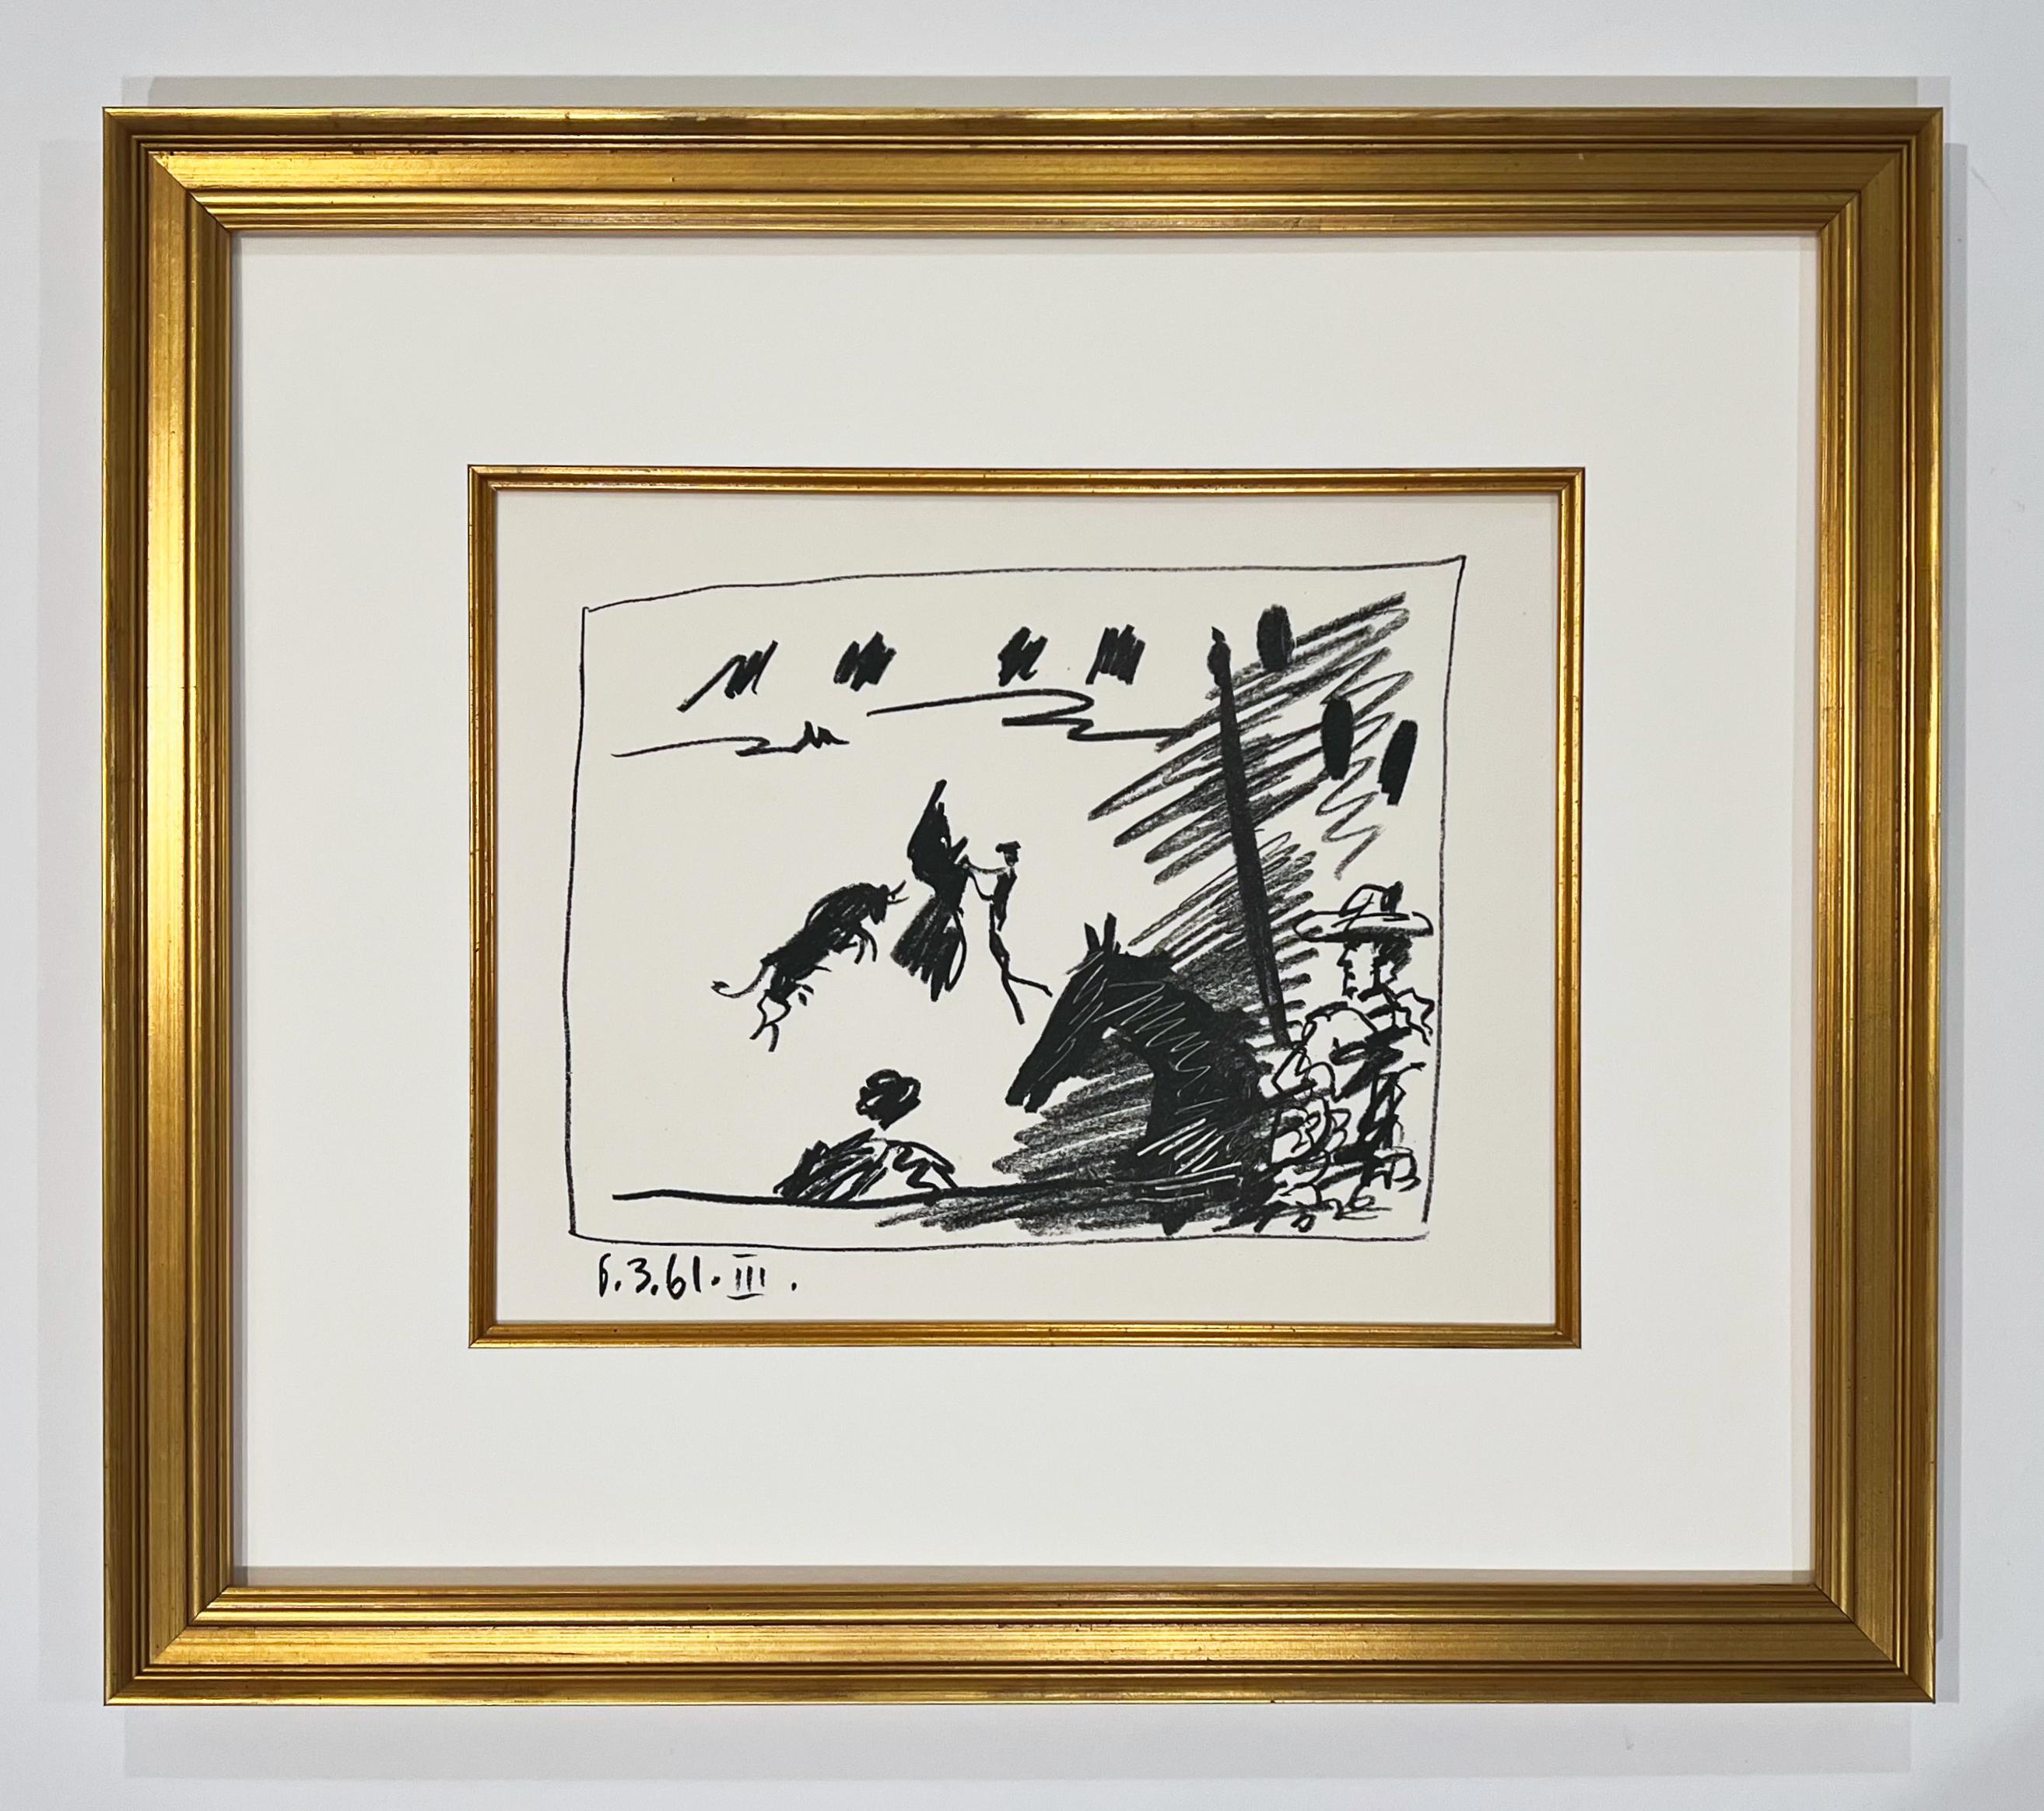 A Los Toros Avec Picasso (Set of Four) - Abstract Print by Pablo Picasso